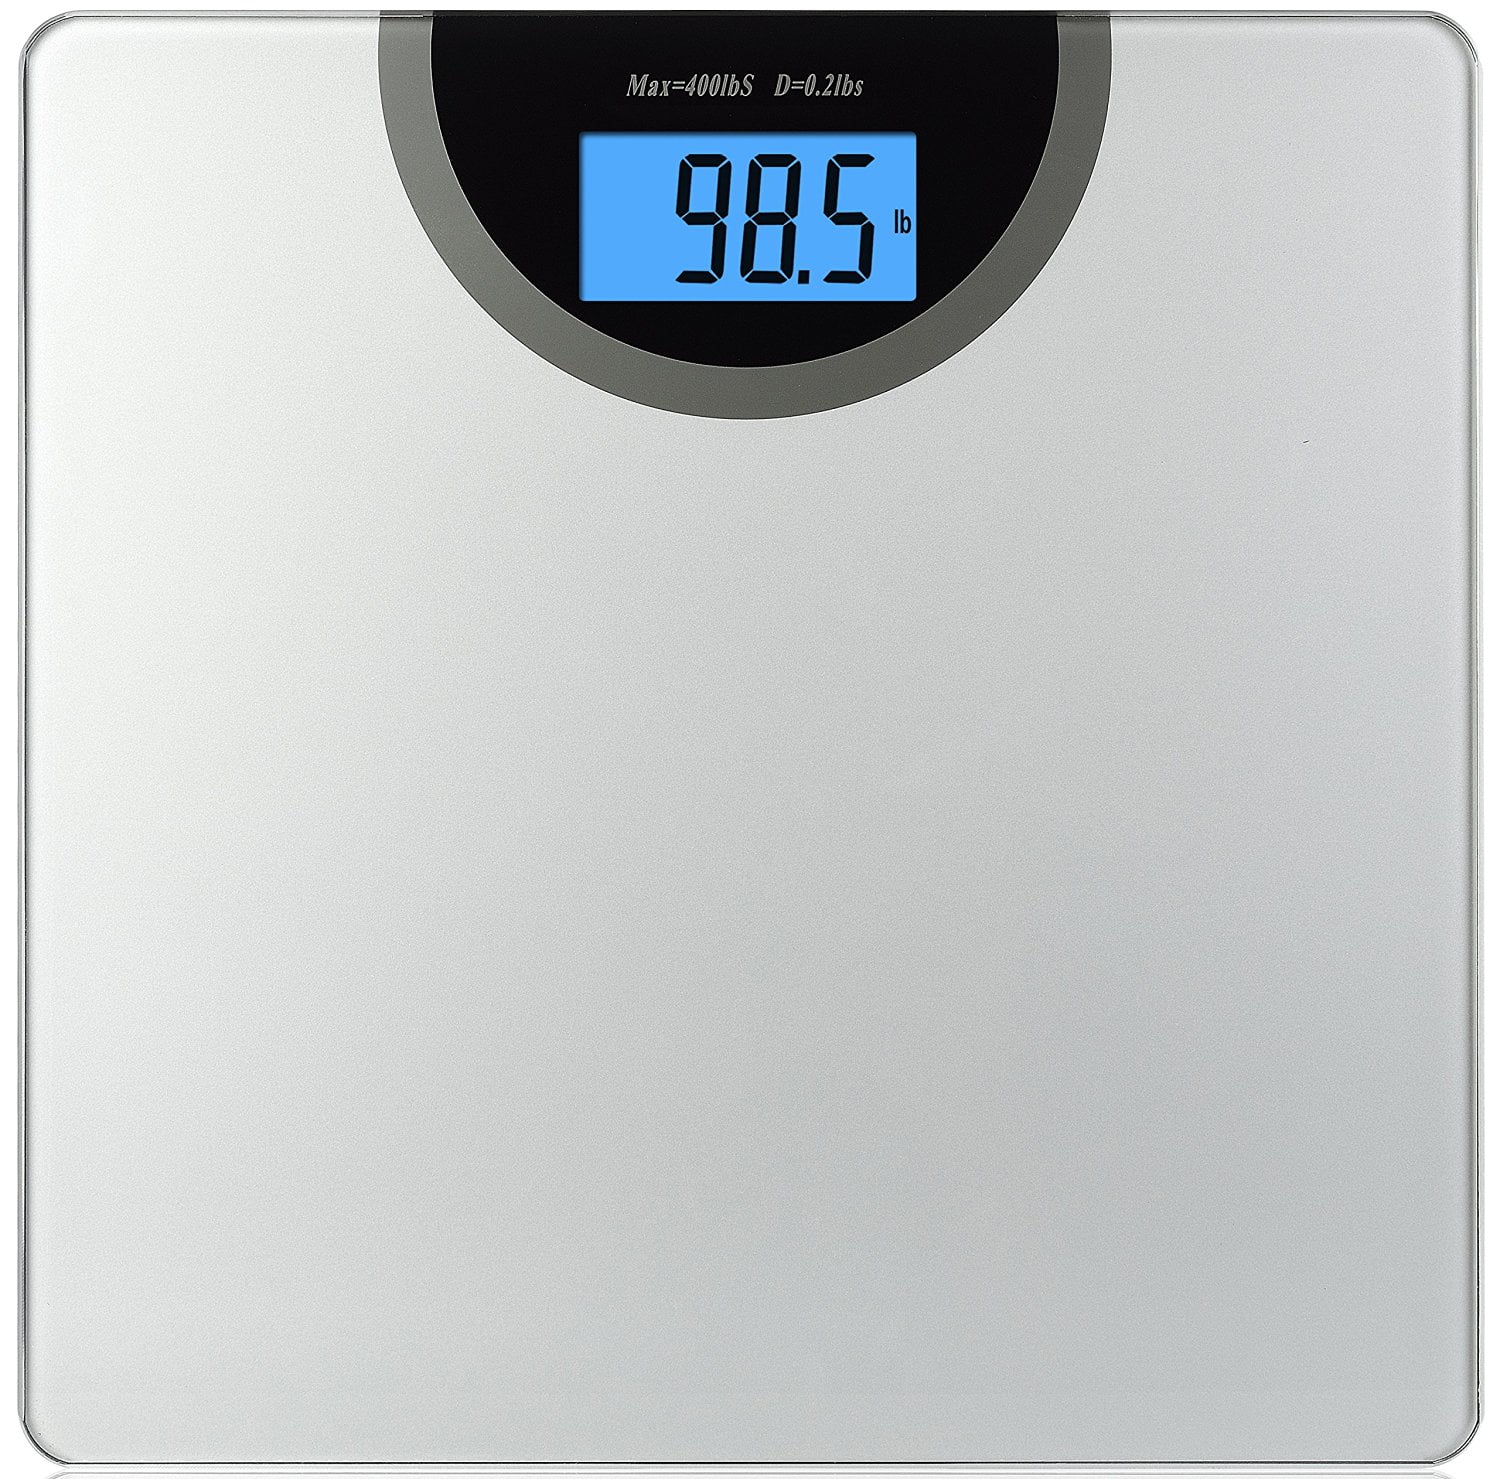 Ezpounds Digital Body Weight Bathroom Scale High Accuracy Step-On Technology 